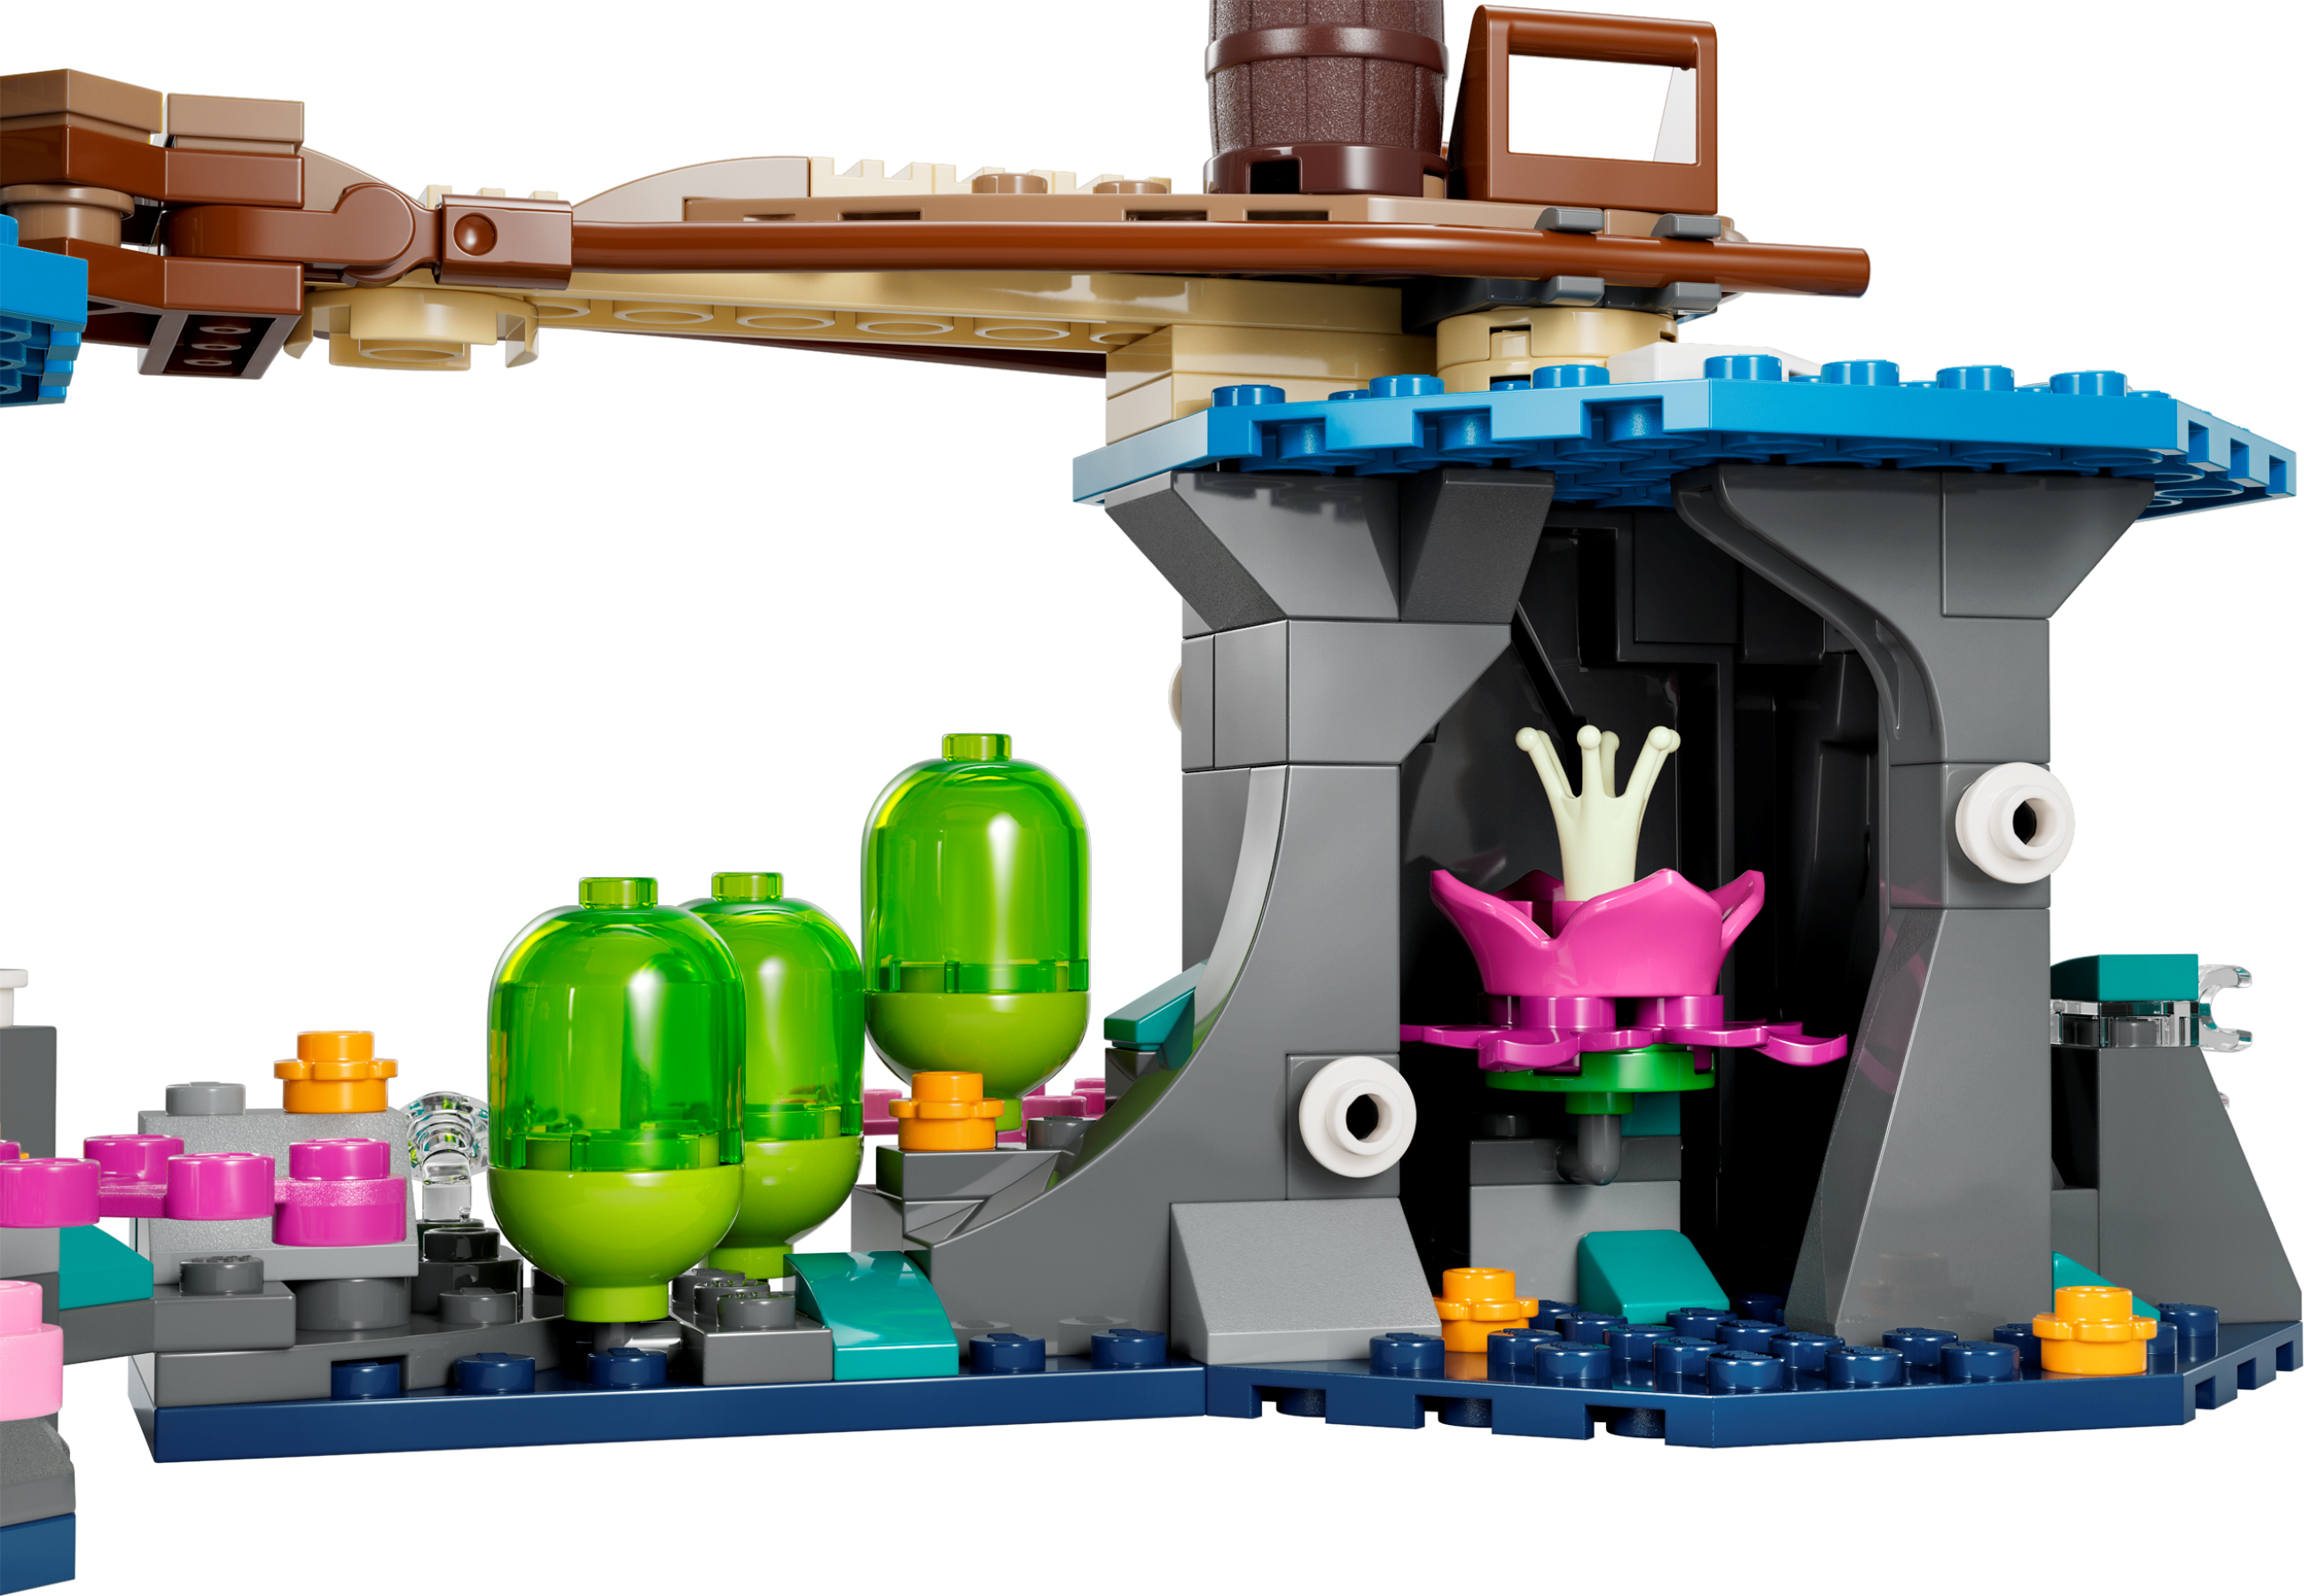 LEGO - Avatar - 75578 - Lego The Way of Water Metkayina Reef Home